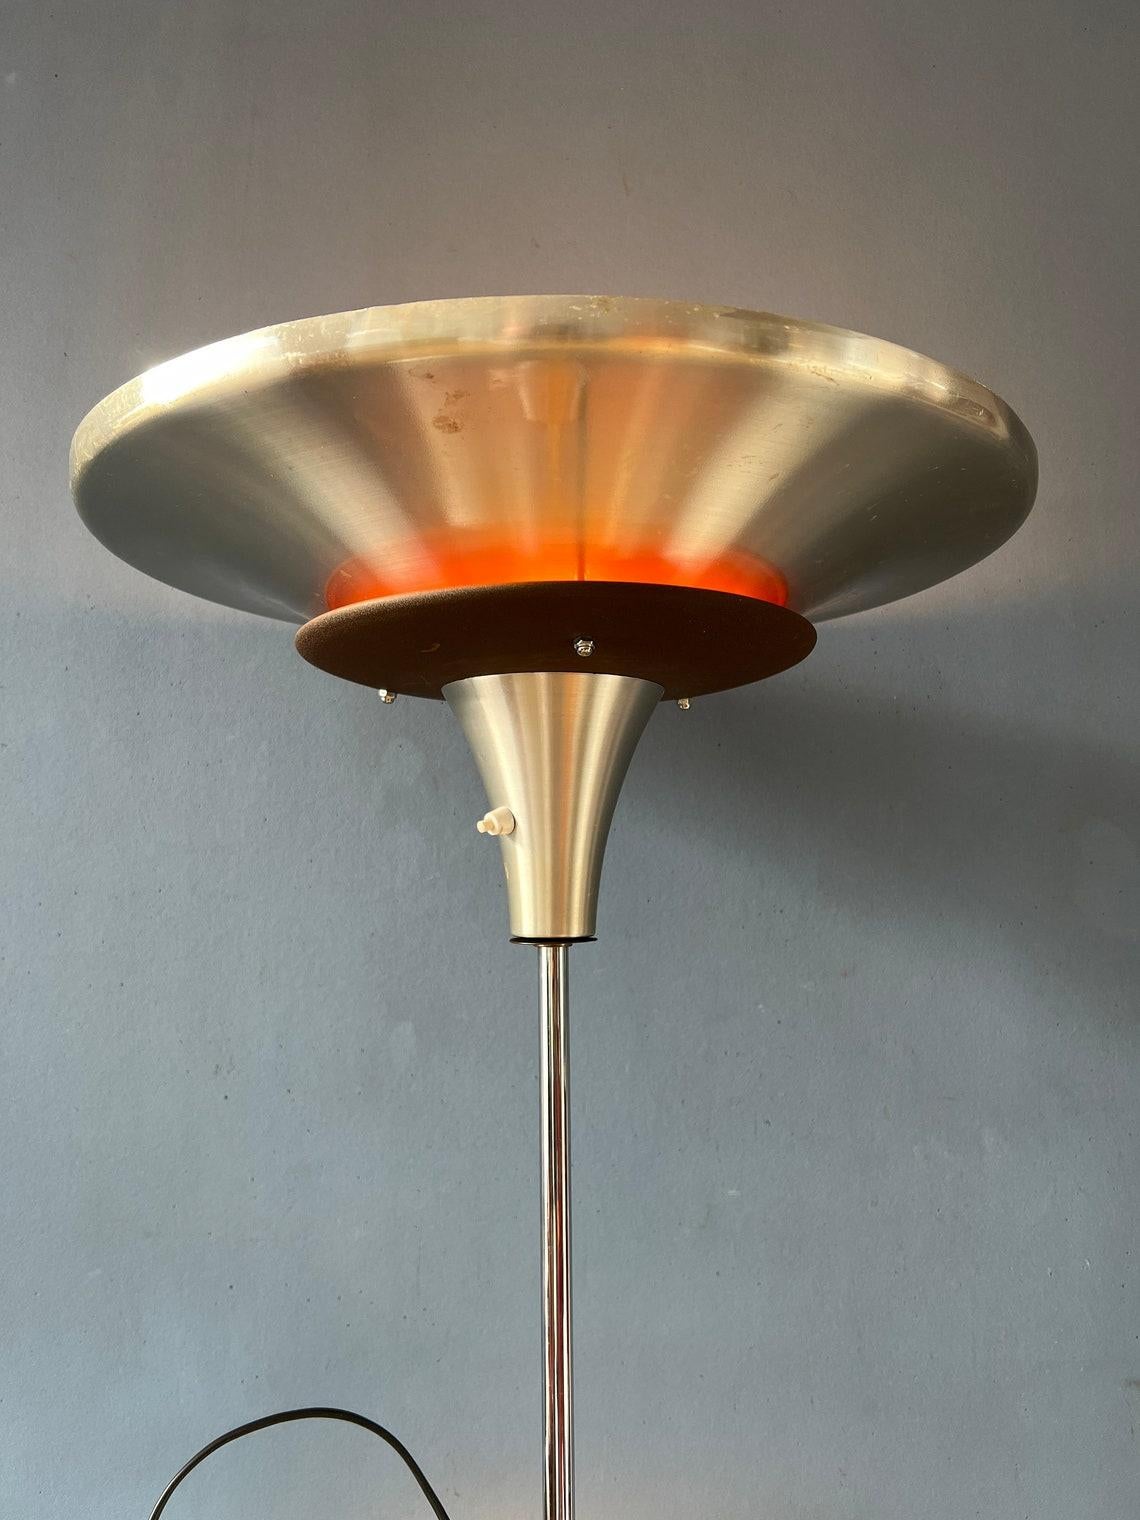 Vintage Lakro Amstelveen Space Age UFO Floor Lamp with Eyeball Shade, 1970s In Good Condition For Sale In ROTTERDAM, ZH